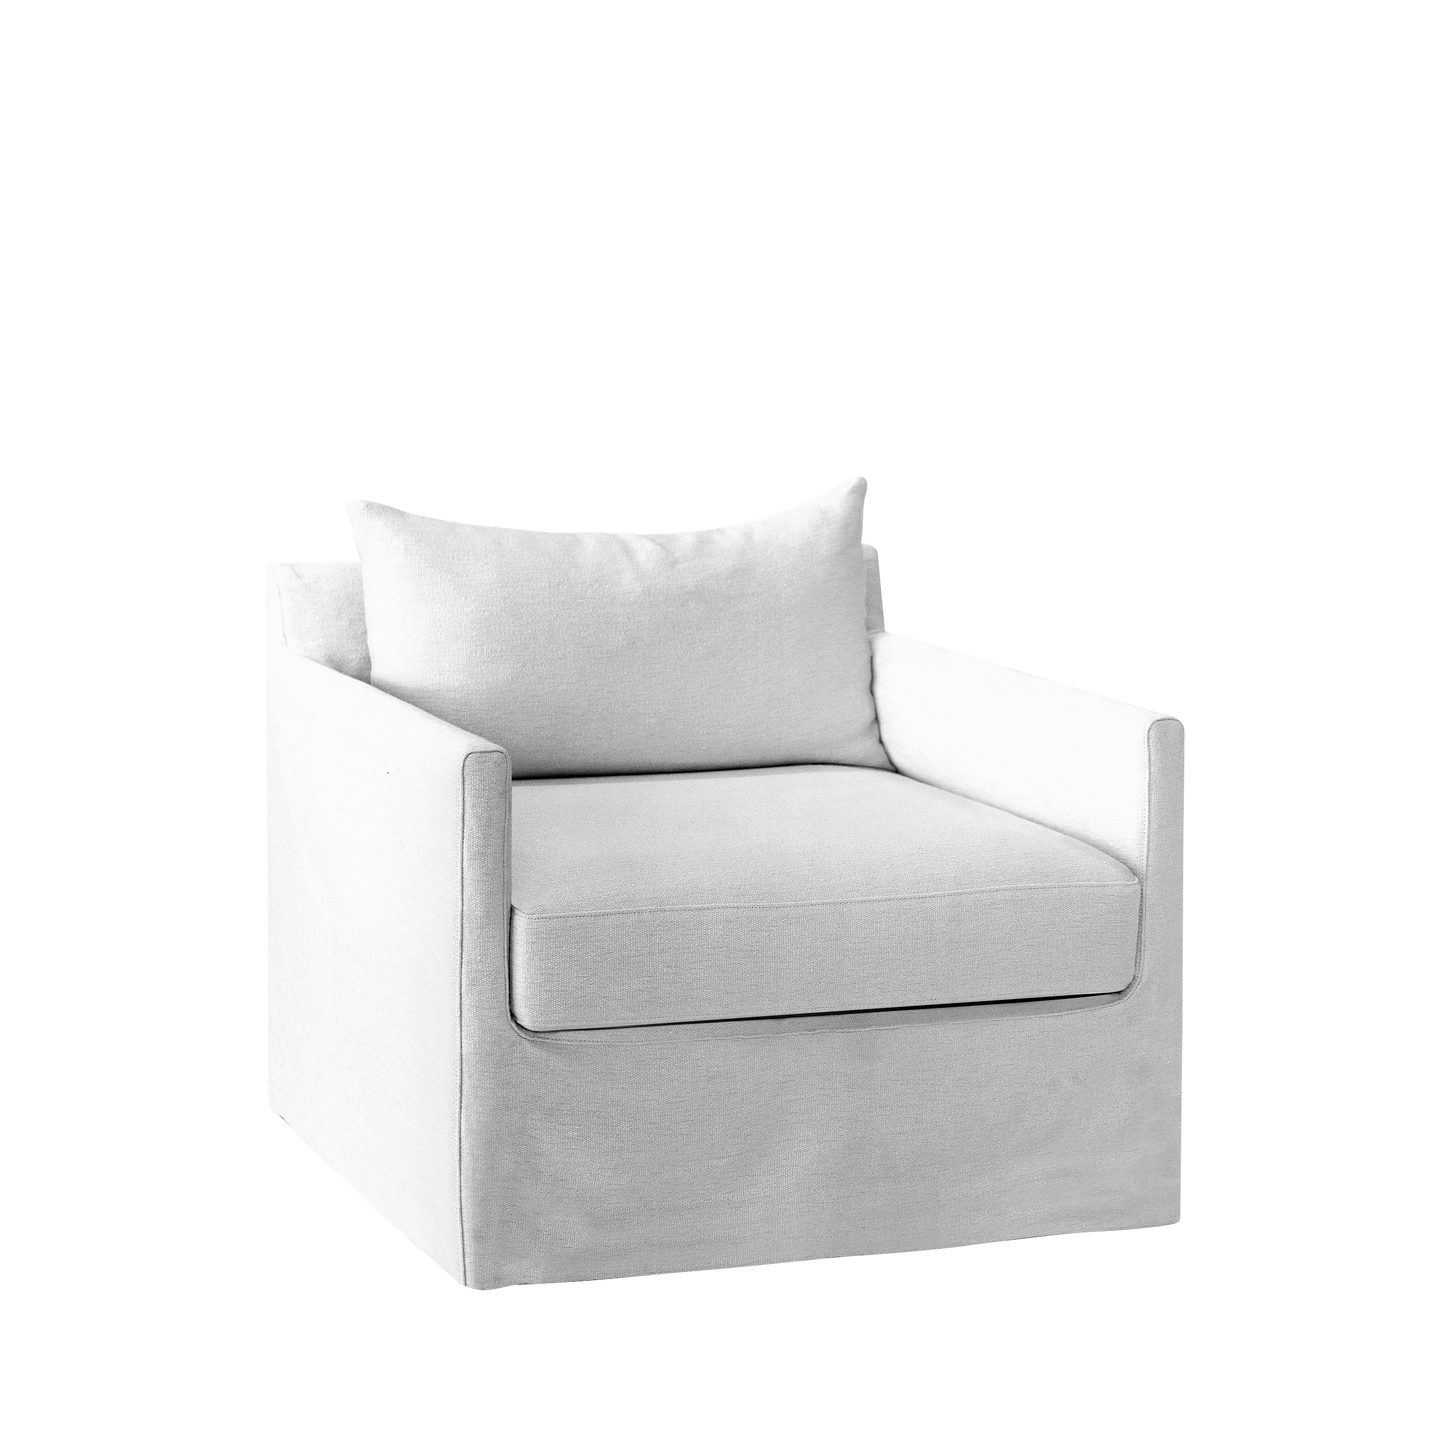 Extra wide and linara white Alba lounge chair 